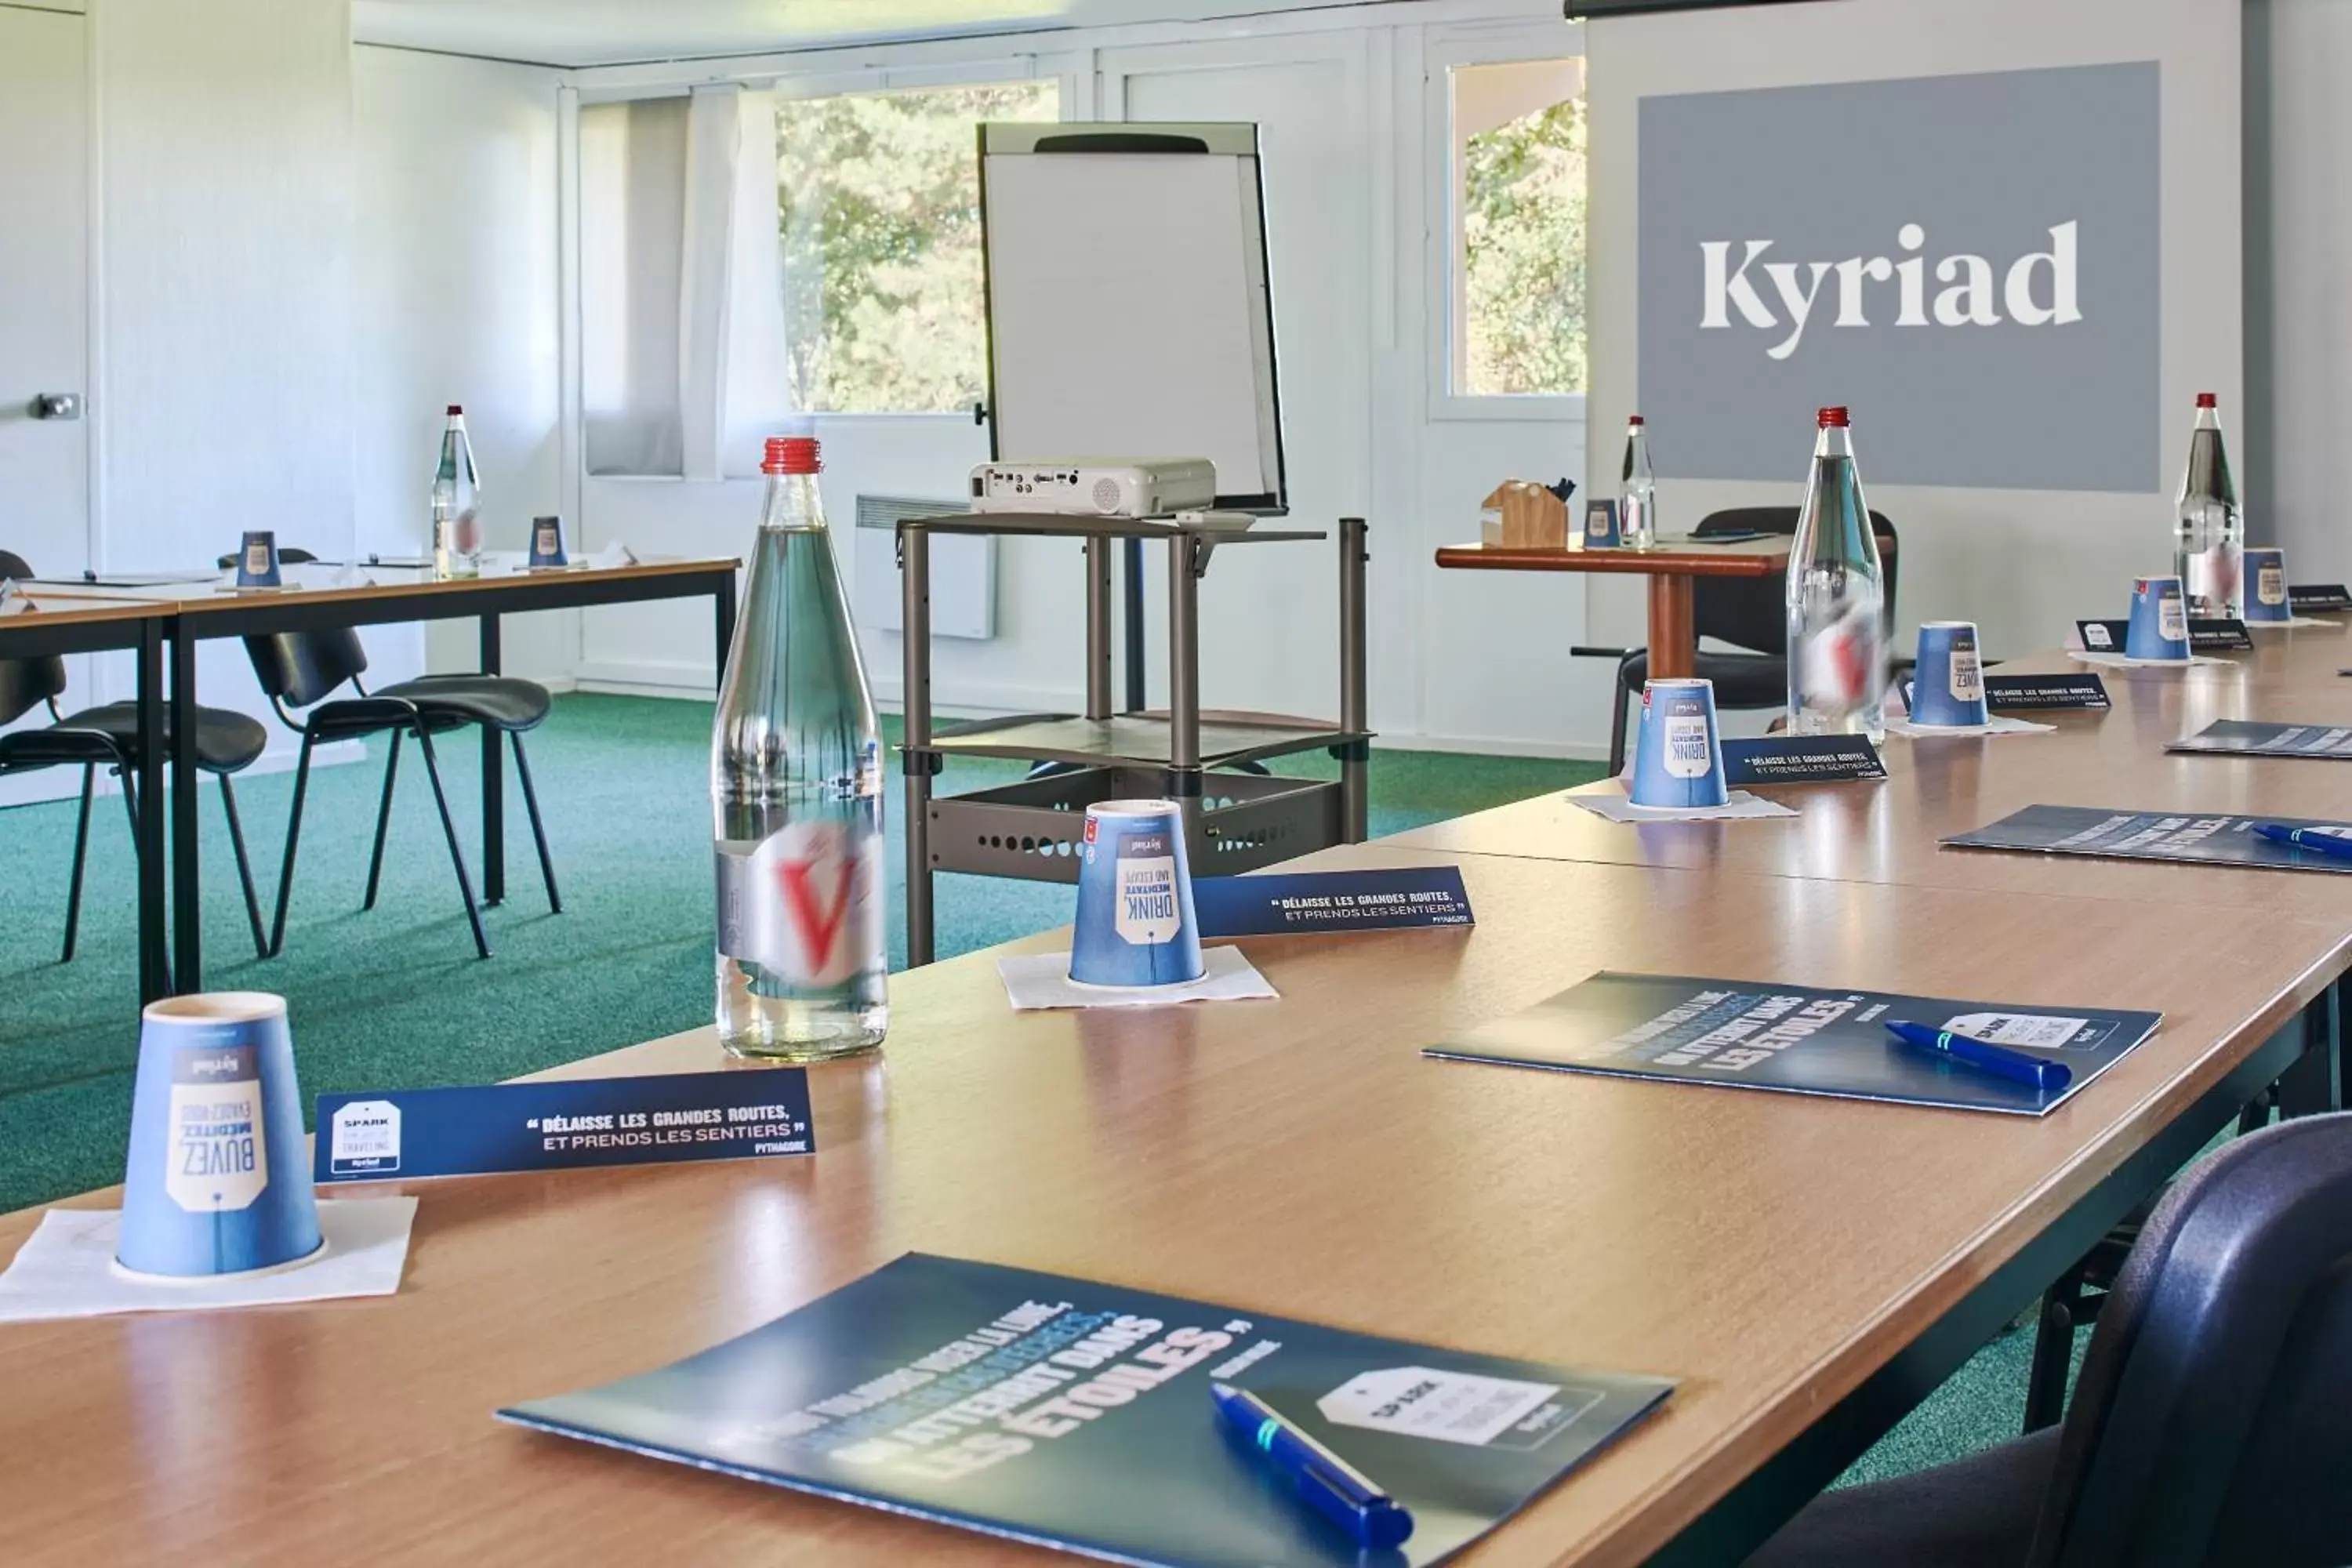 Meeting/conference room in Kyriad Caen Nord - Hérouville-Saint-Clair